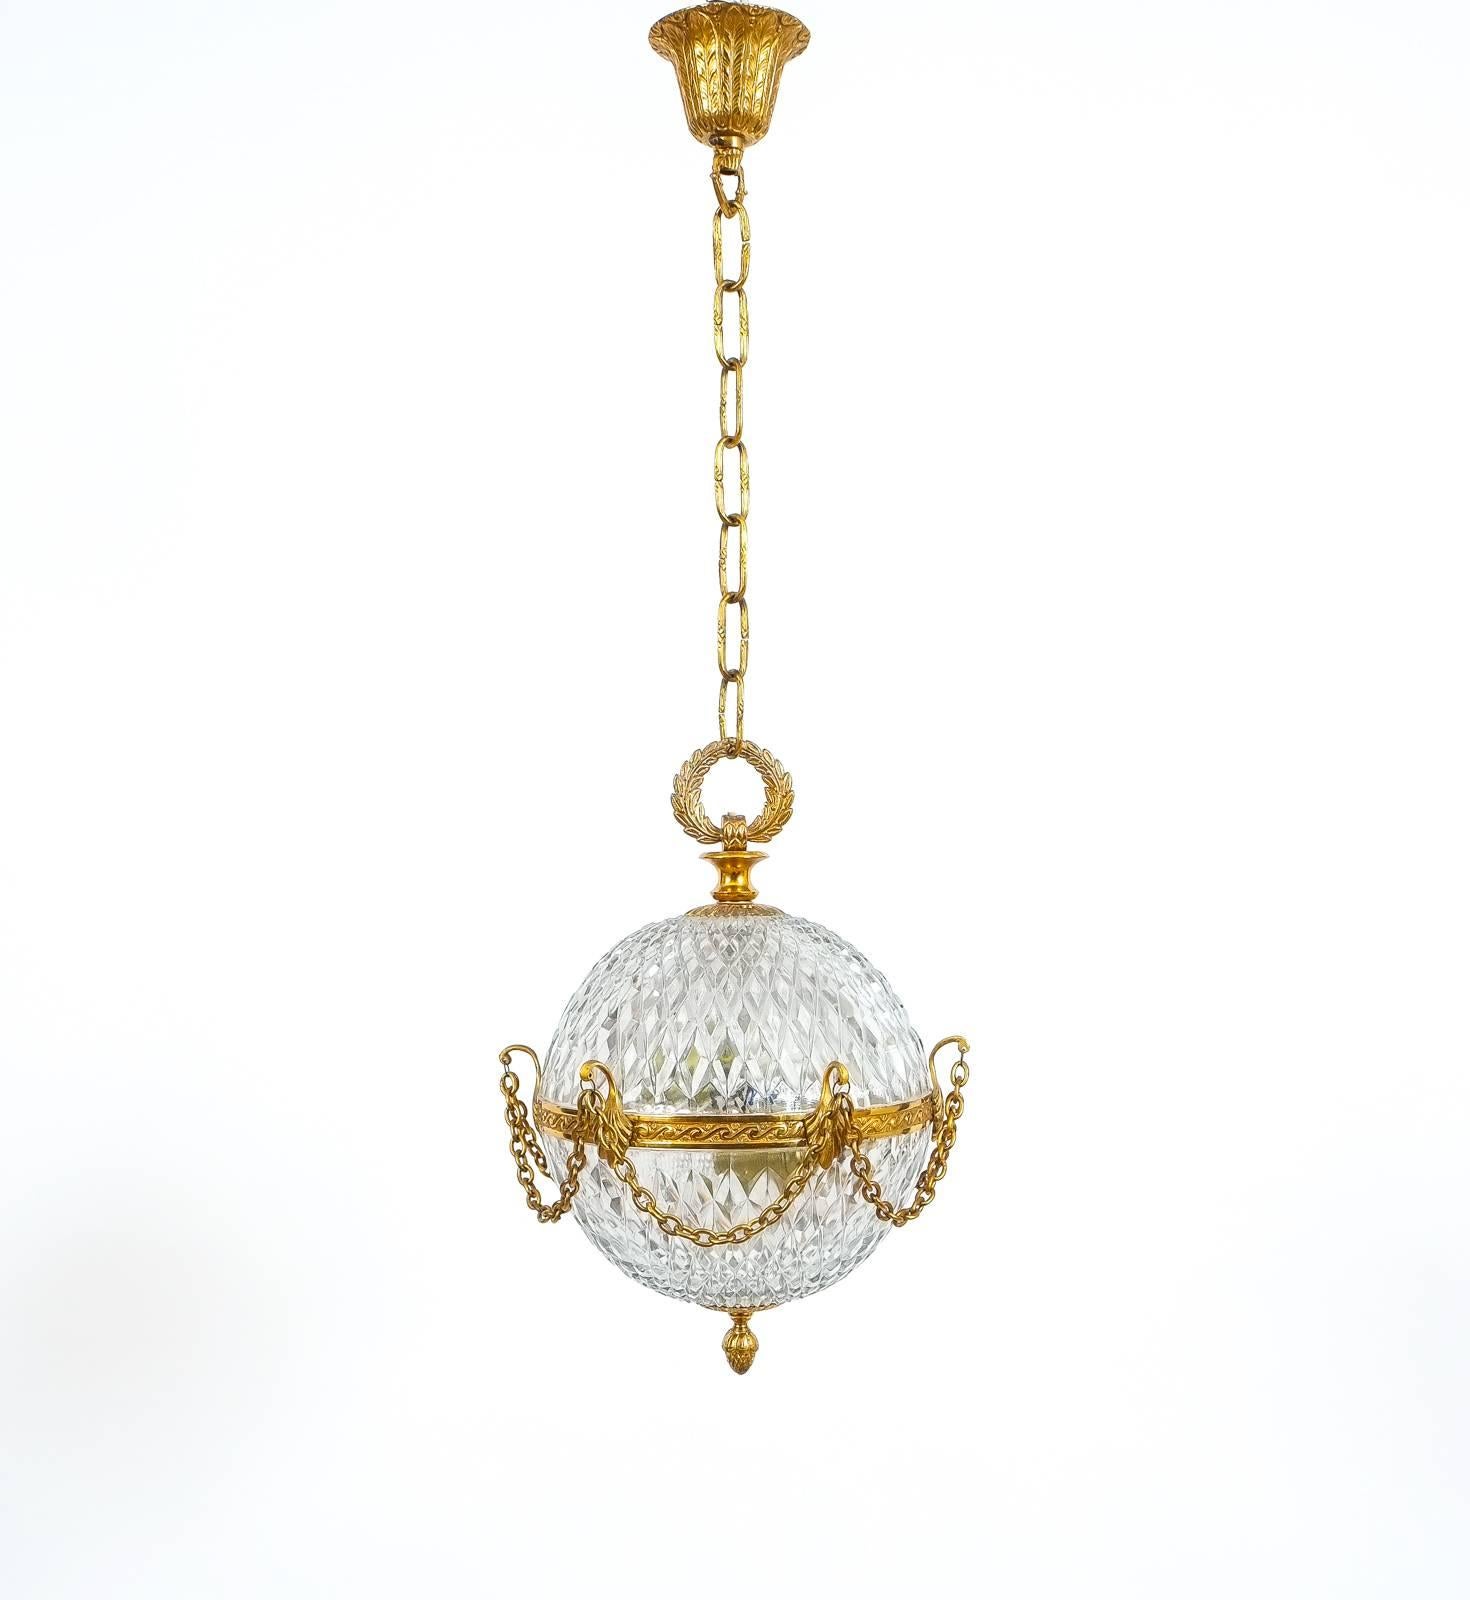 Empire Revival Beautiful Pair of Neo-Empire Pendant Lights from Glass and Brass